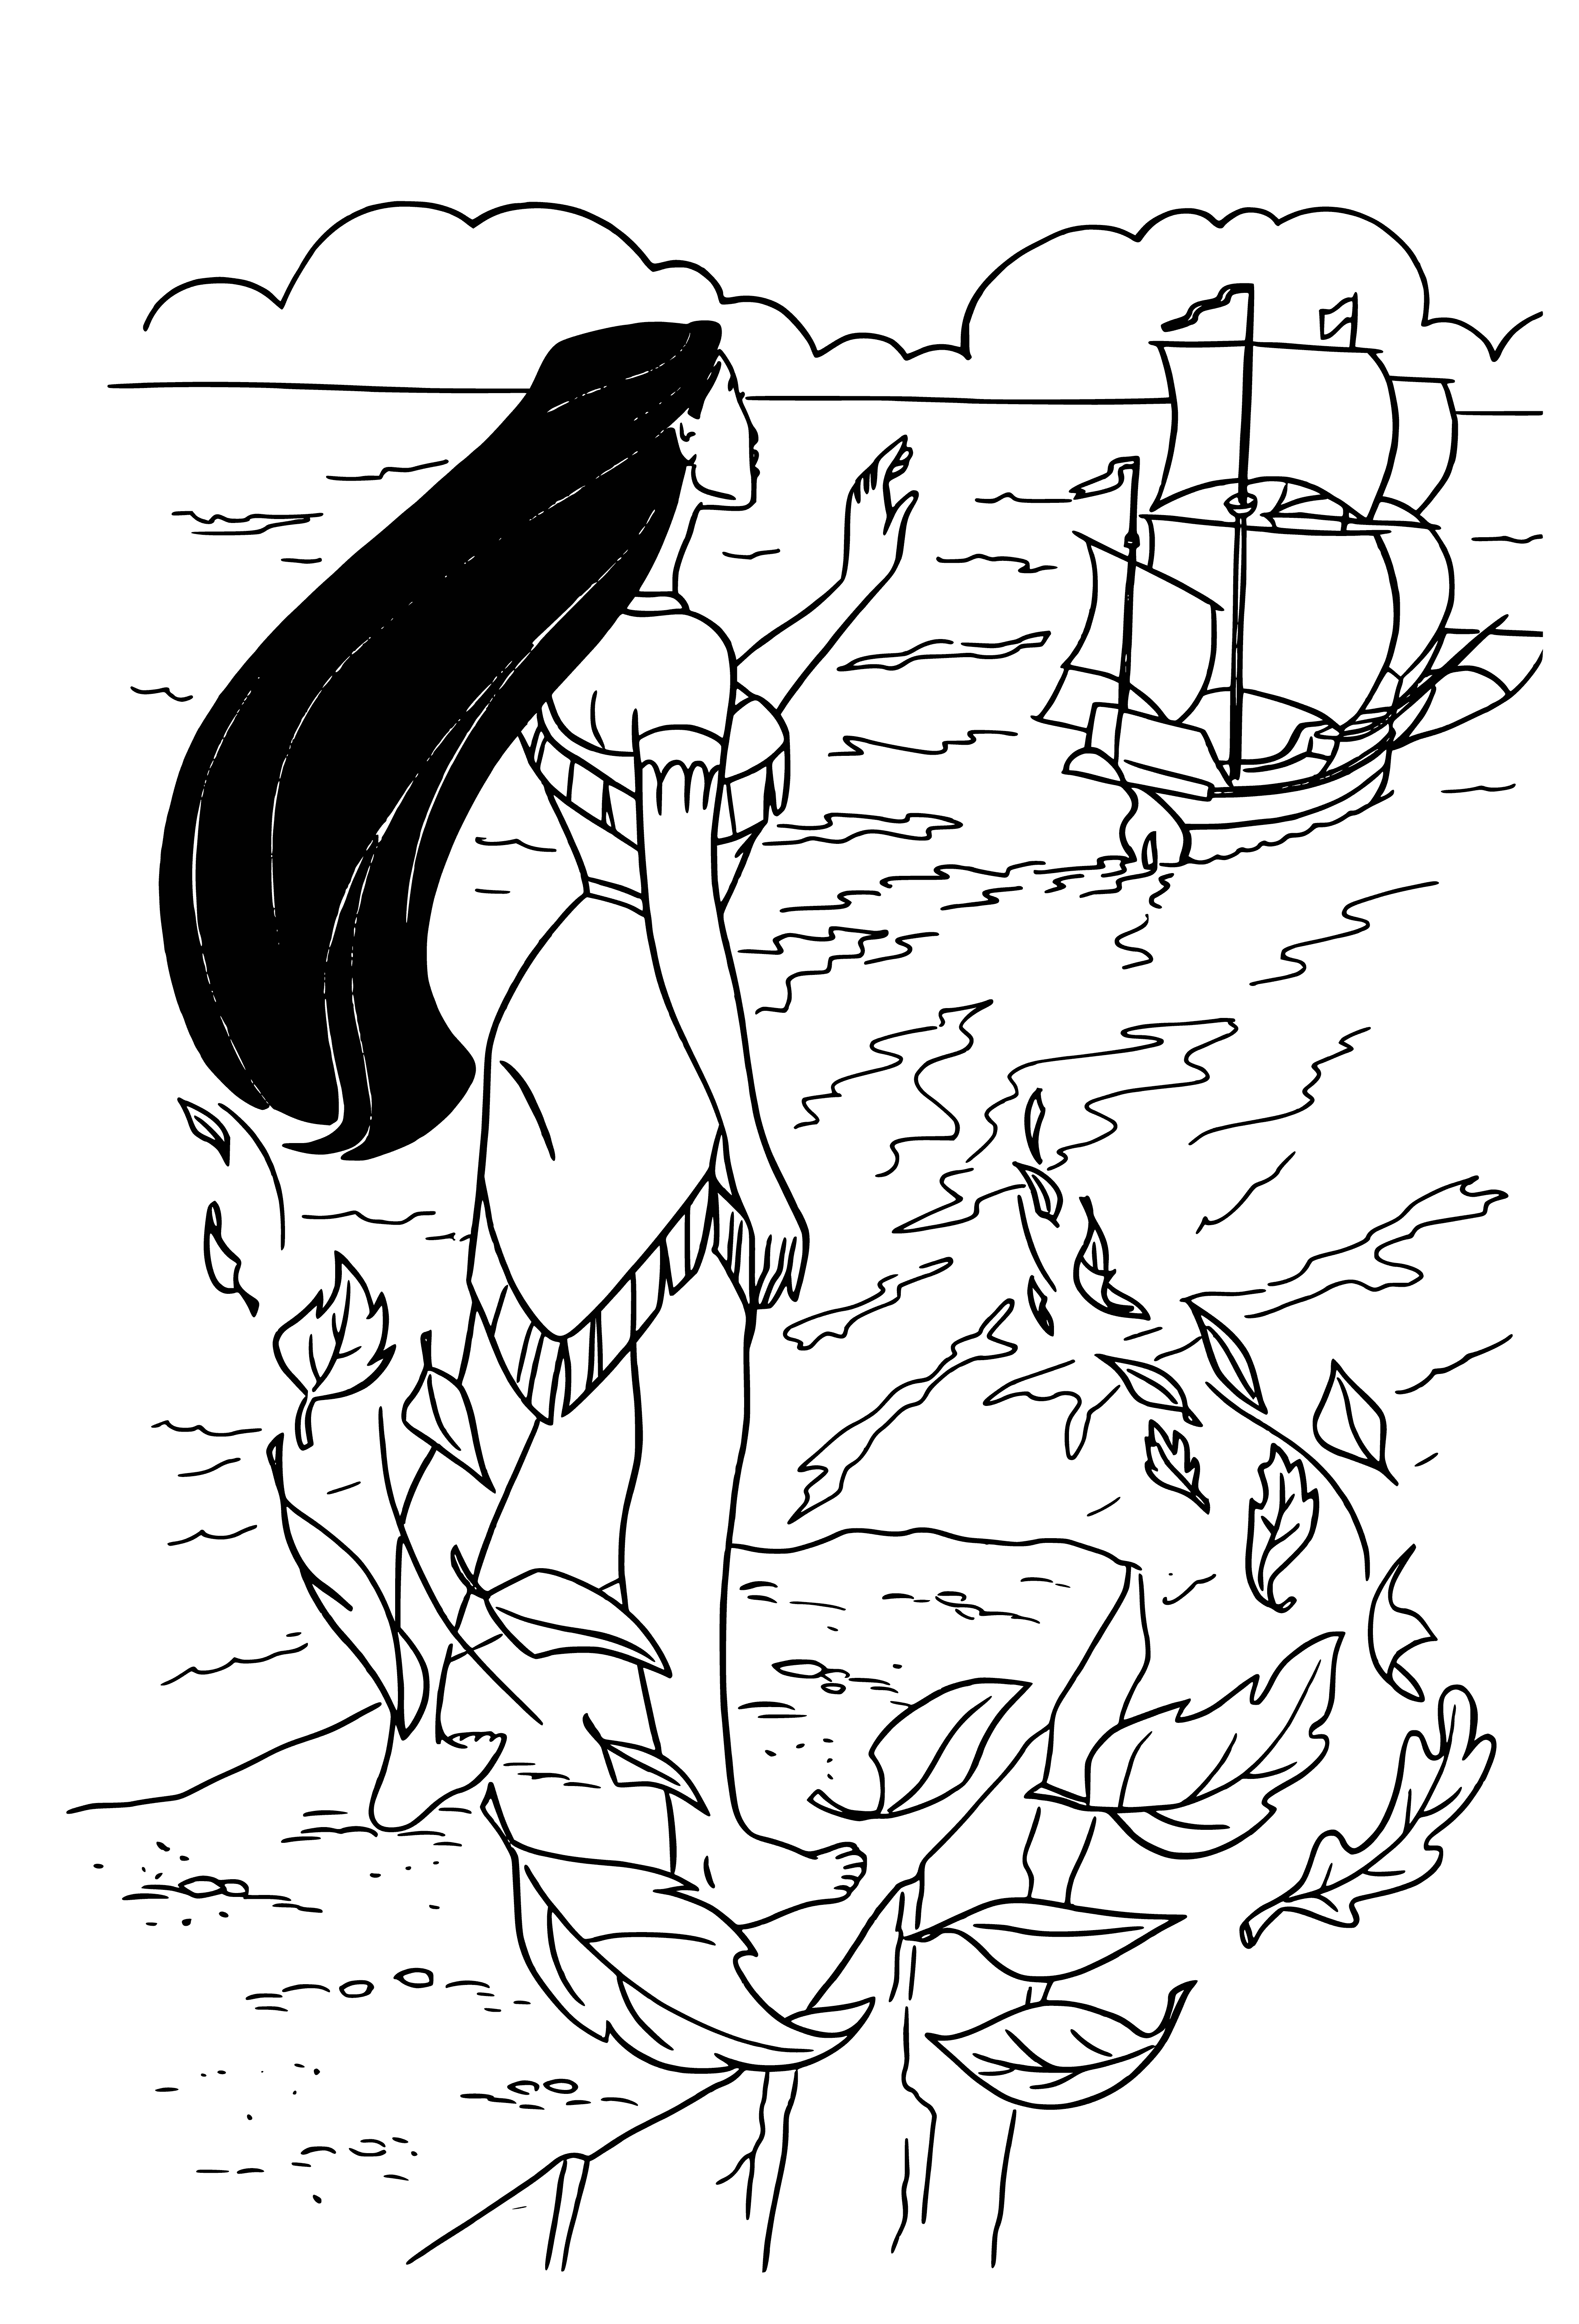 coloring page: Ship sails off into peaceful blue seas, with bright sun and whitecaps in the distance.